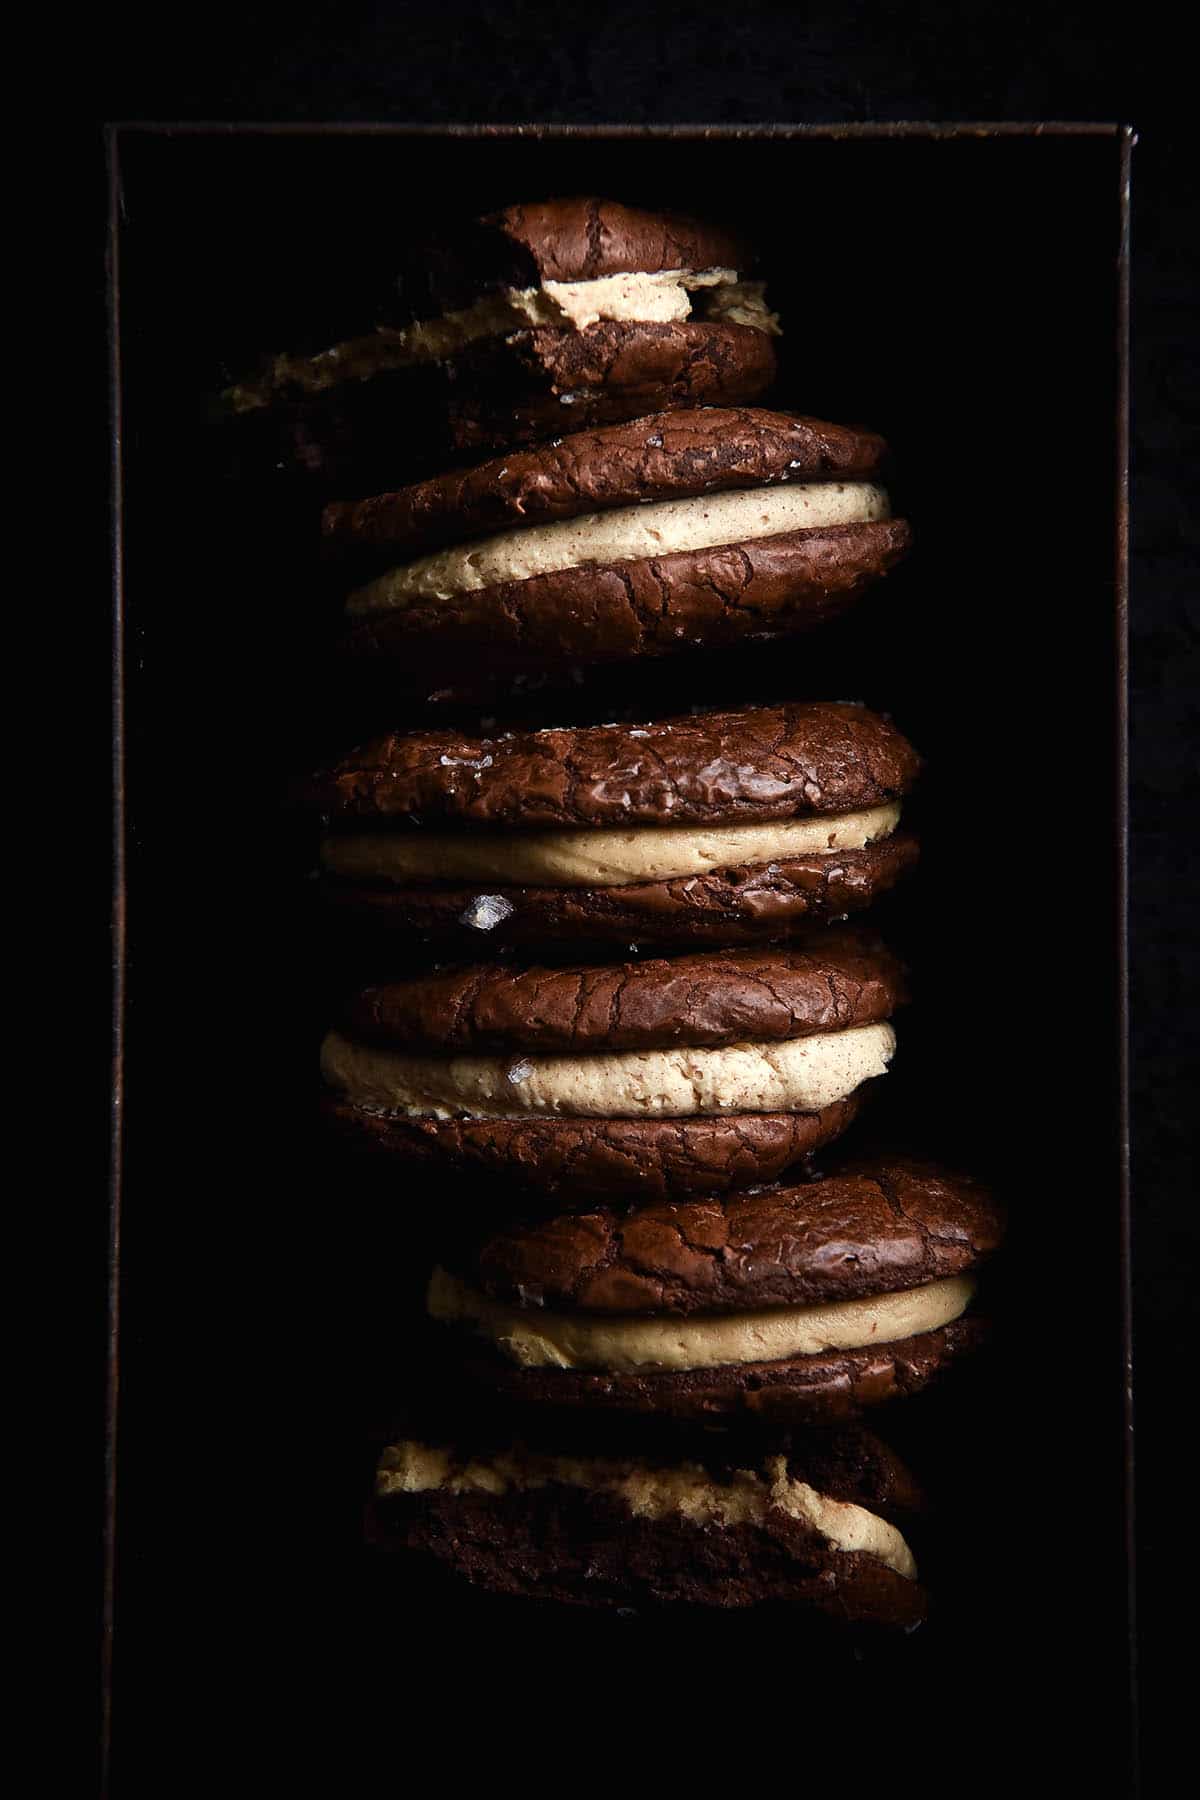 A moody aerial view of a tin of gluten free brownie sandwich cookies. The sandwich cookies are casually arranged in a vertical order, with the brown butter buttercream filling and sea salt flakes contrasting against the deep chocolate brown of the cookies